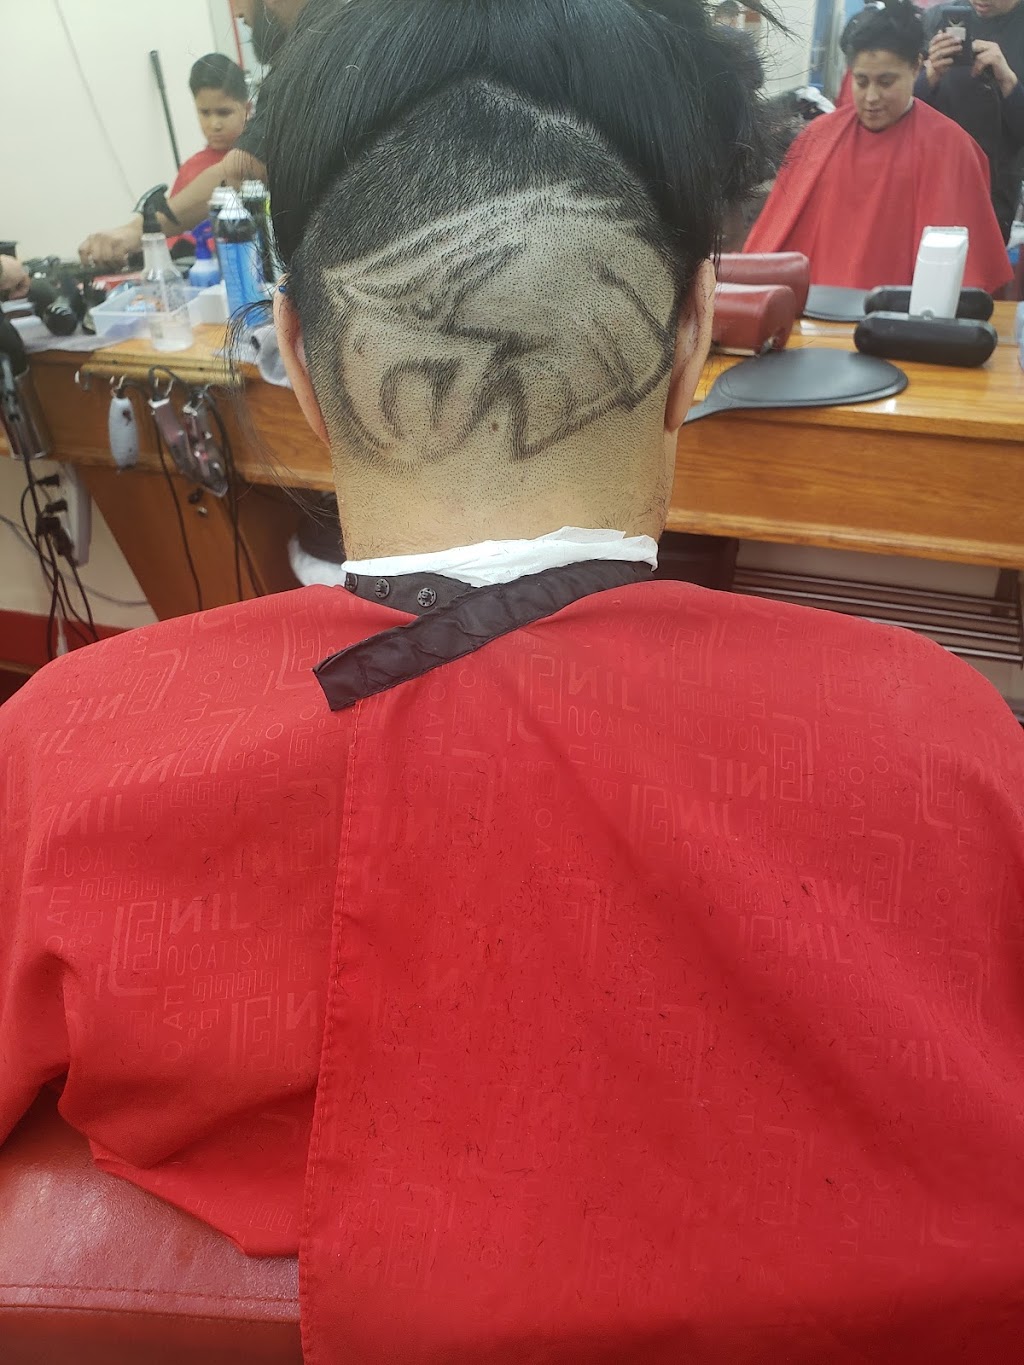 Dominican Barbershop | 605 W Marshall St, Norristown, PA 19401 | Phone: (610) 275-4460